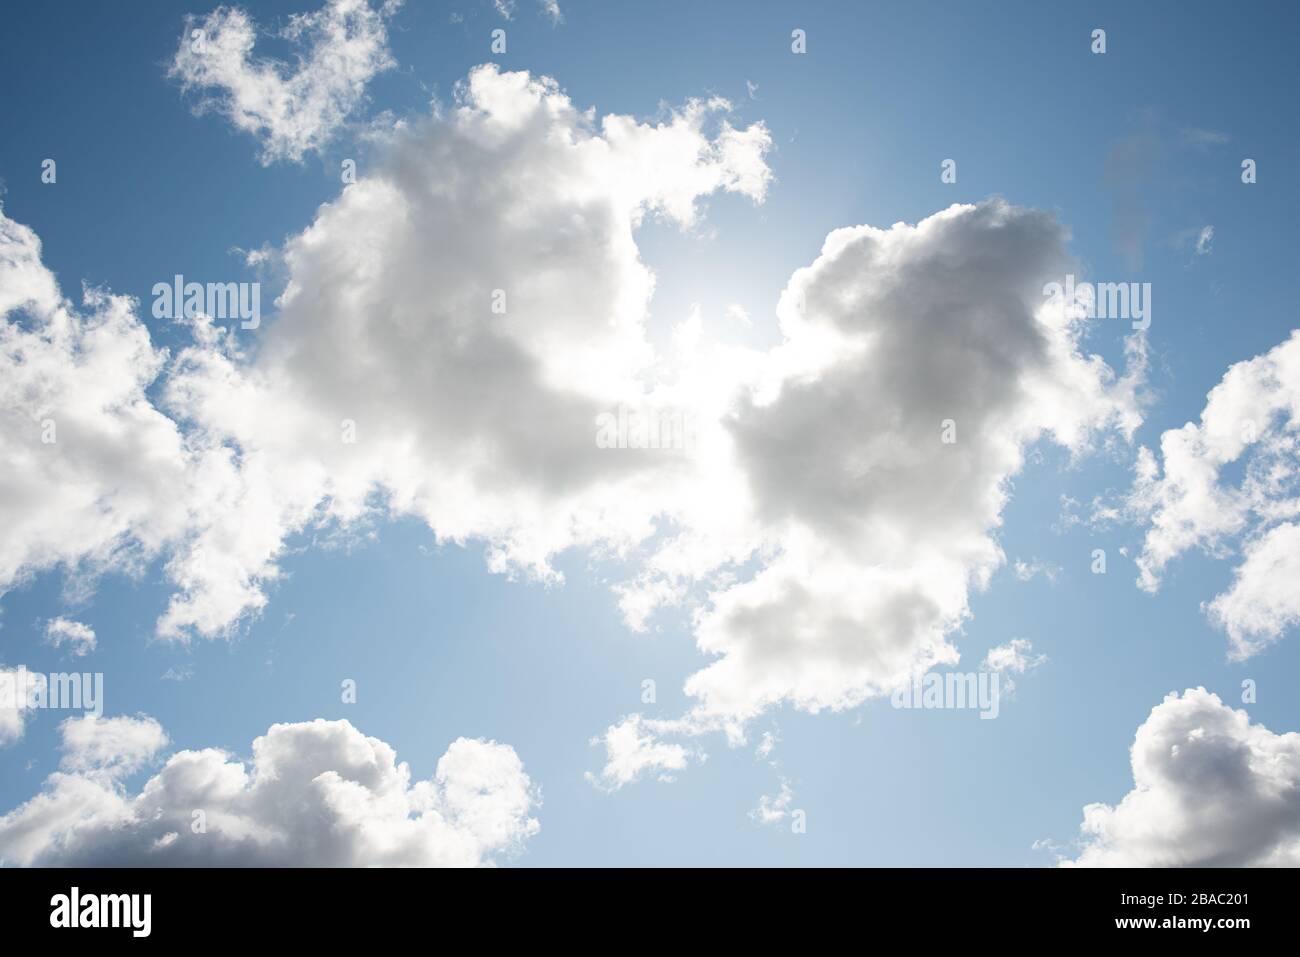 Weather forecast partly cloudy storm clouds stock photo blue skies with sunshine Stock Photo